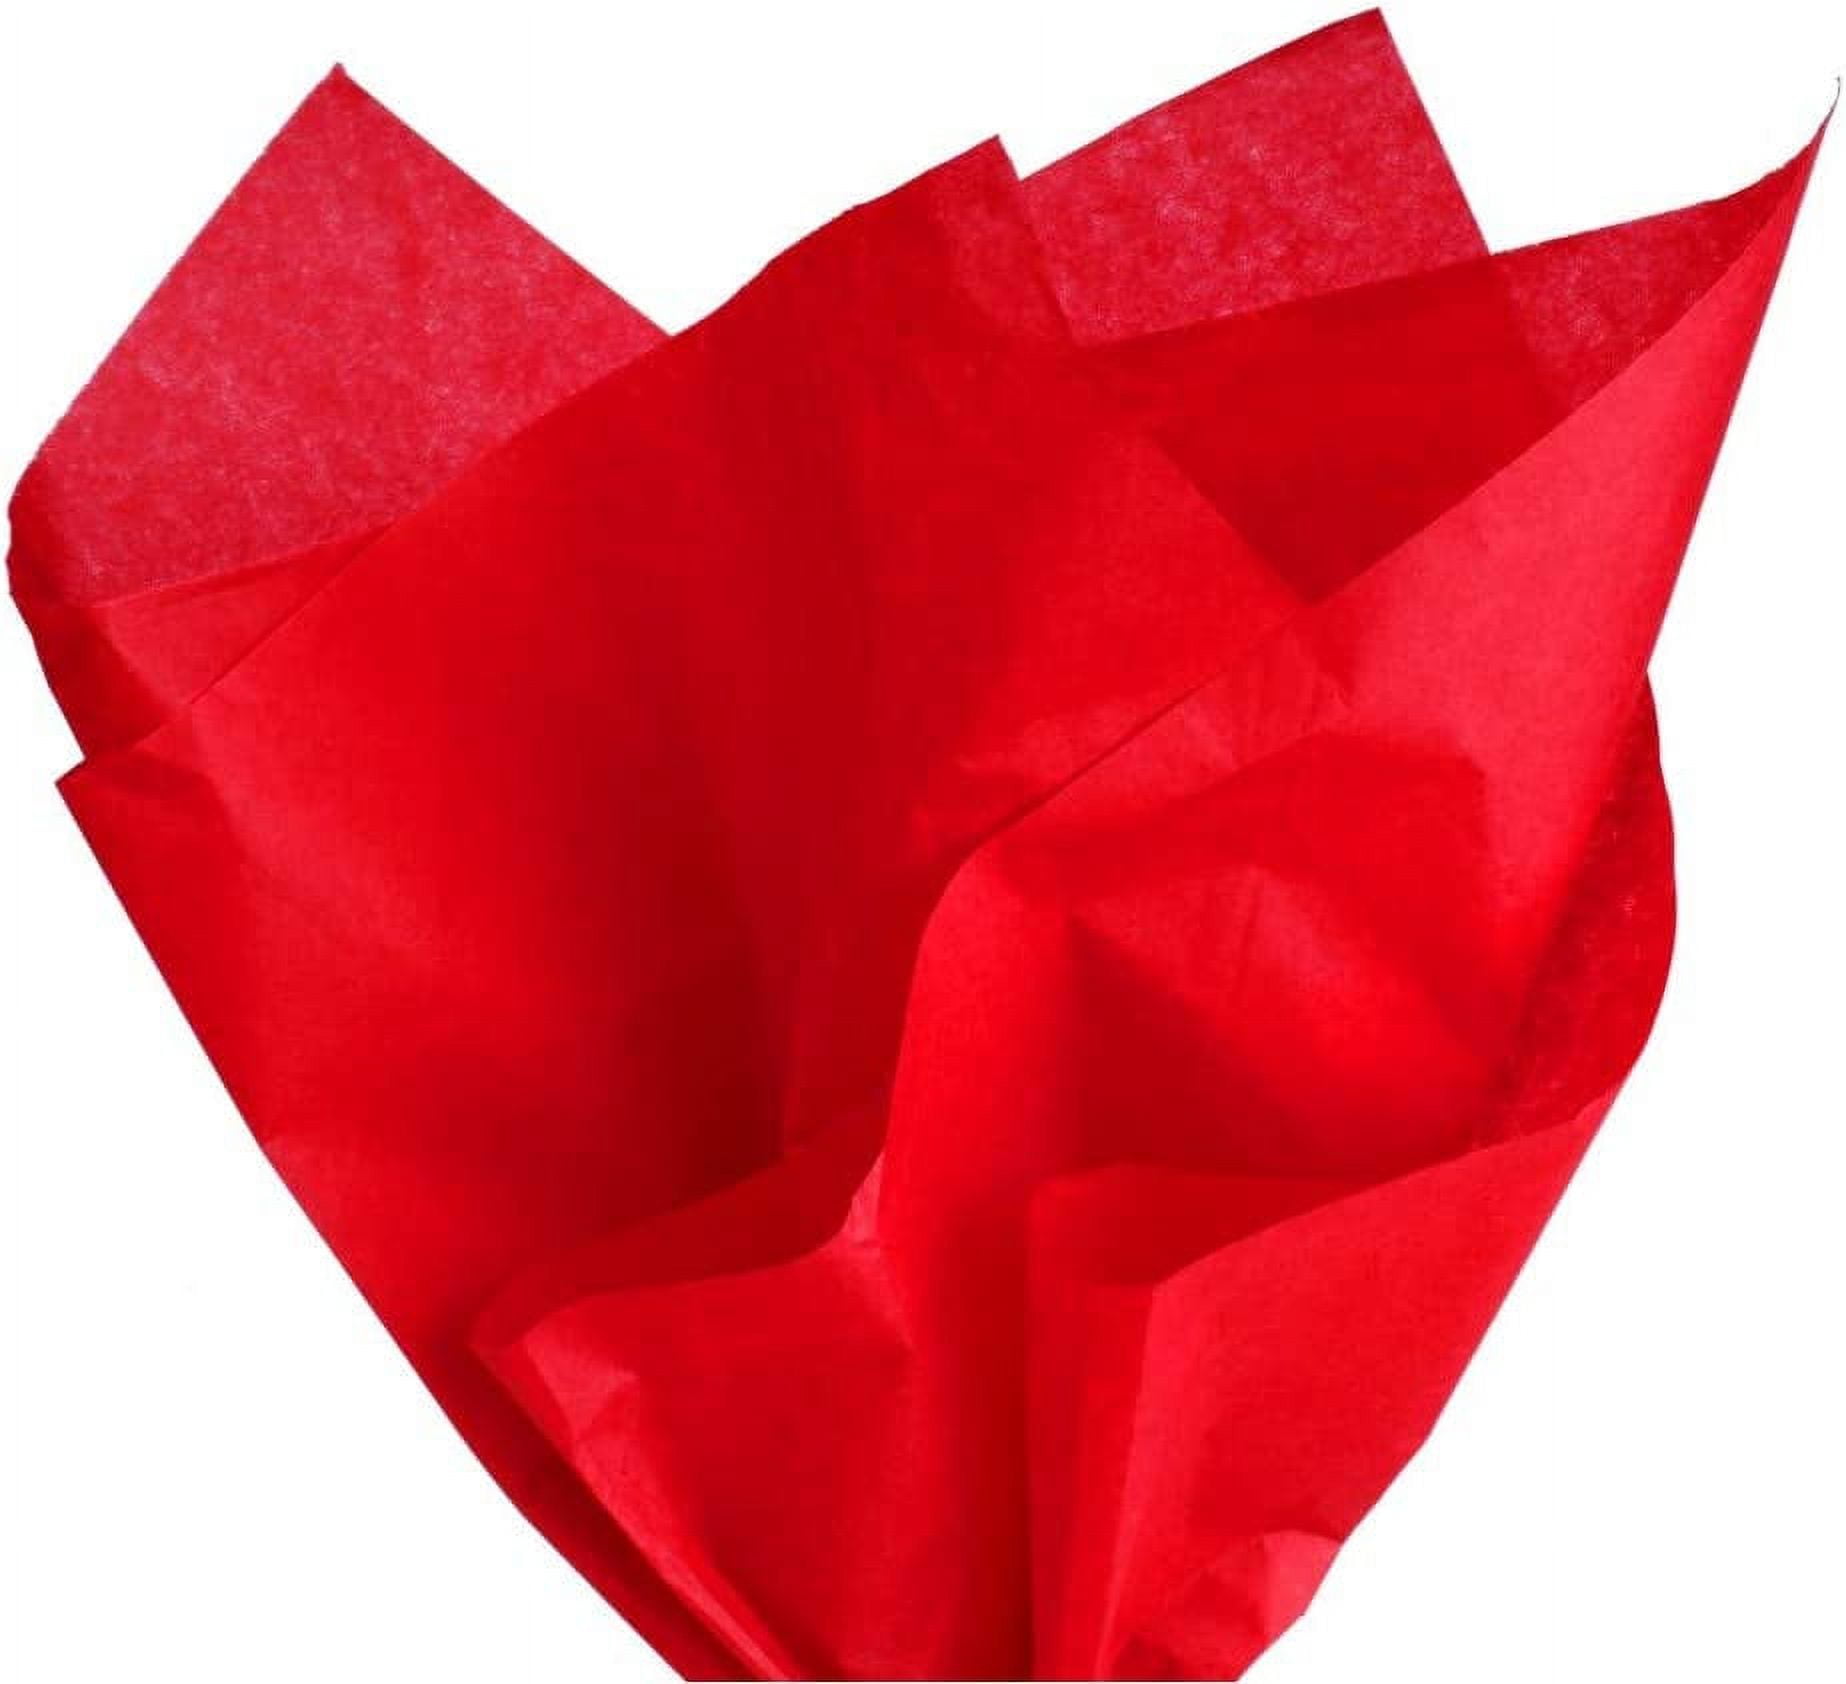 Flowers at Large Tissue Paper 20 inch x 30 inch | Quantity: 200 by Paper Mart, Red